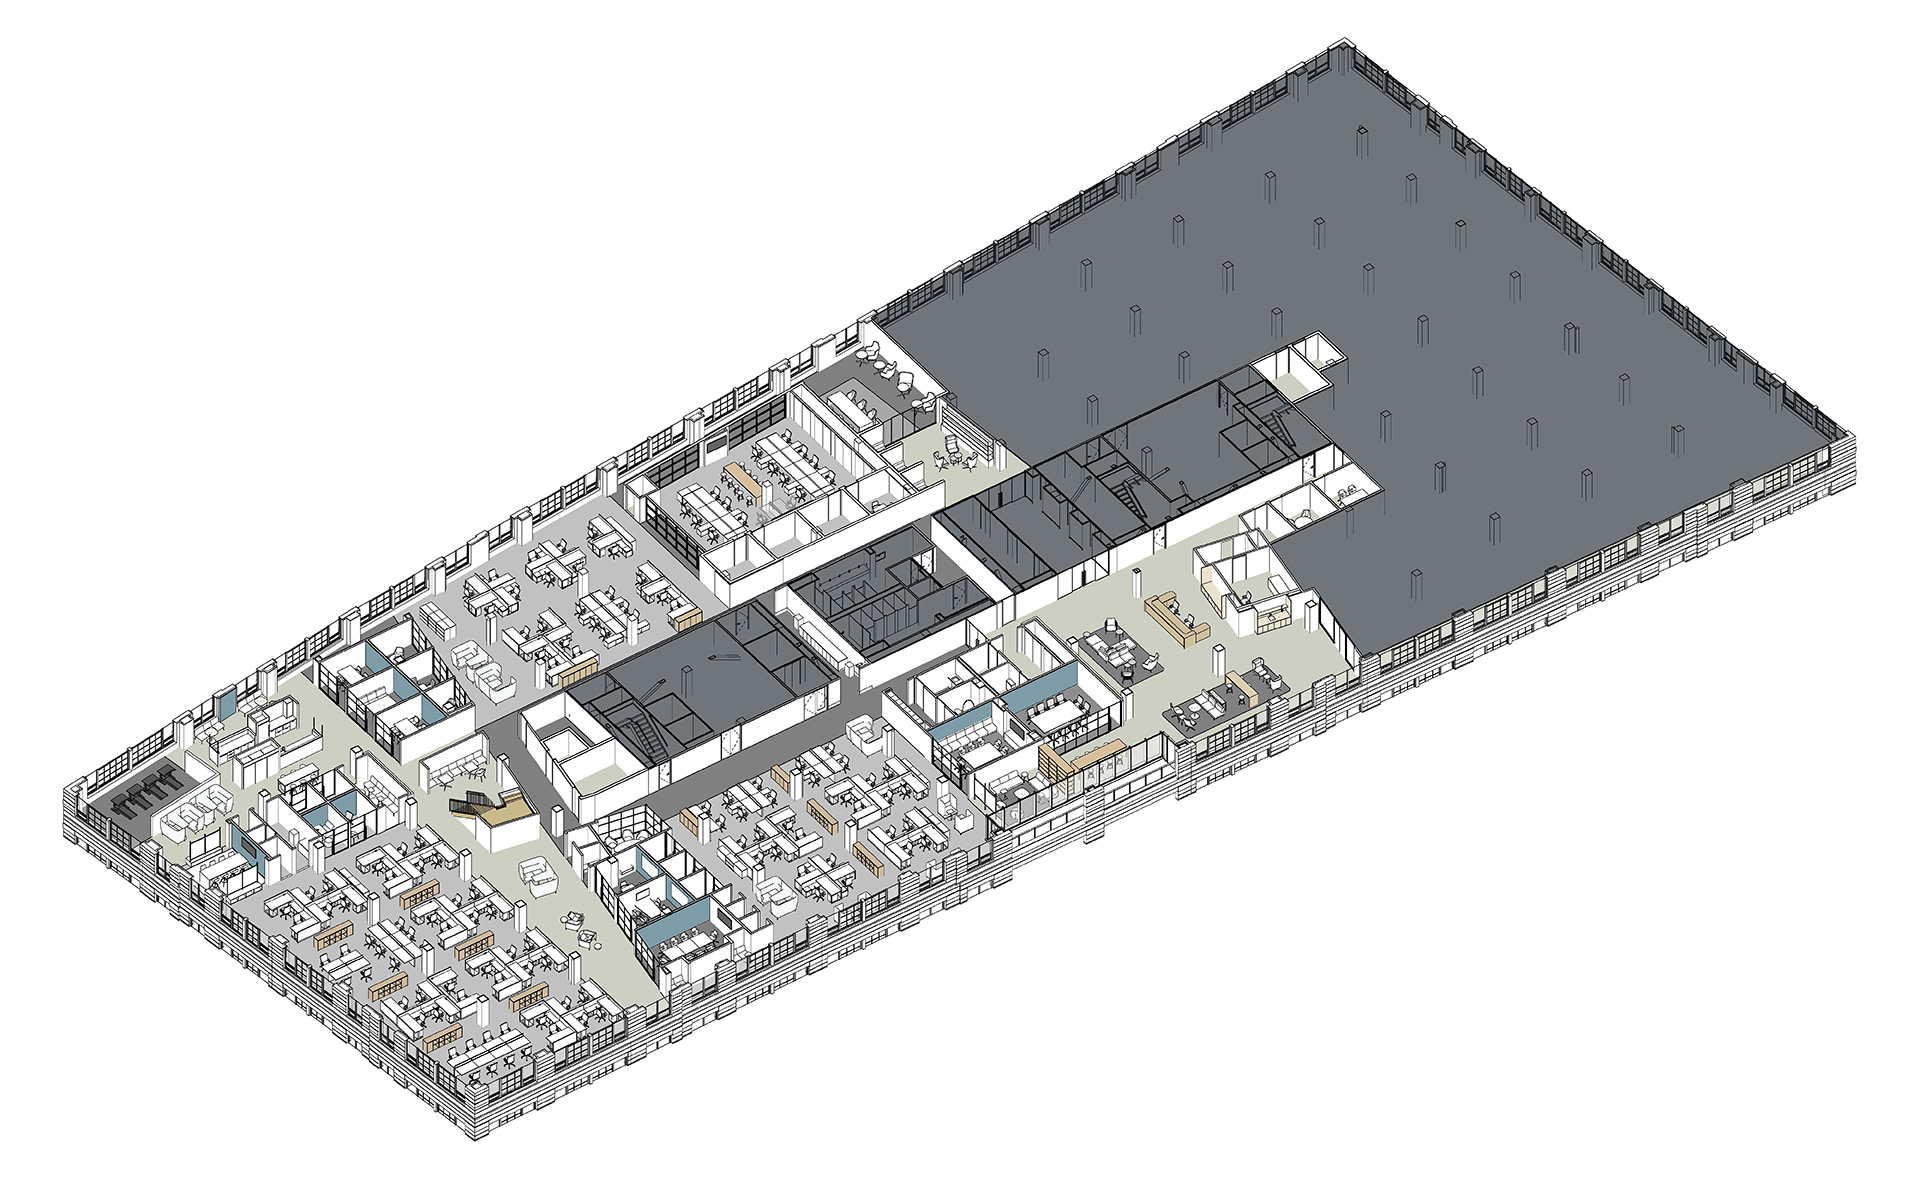 Axonometric view of the fifth floor at the new Mars Wrigley headquarters